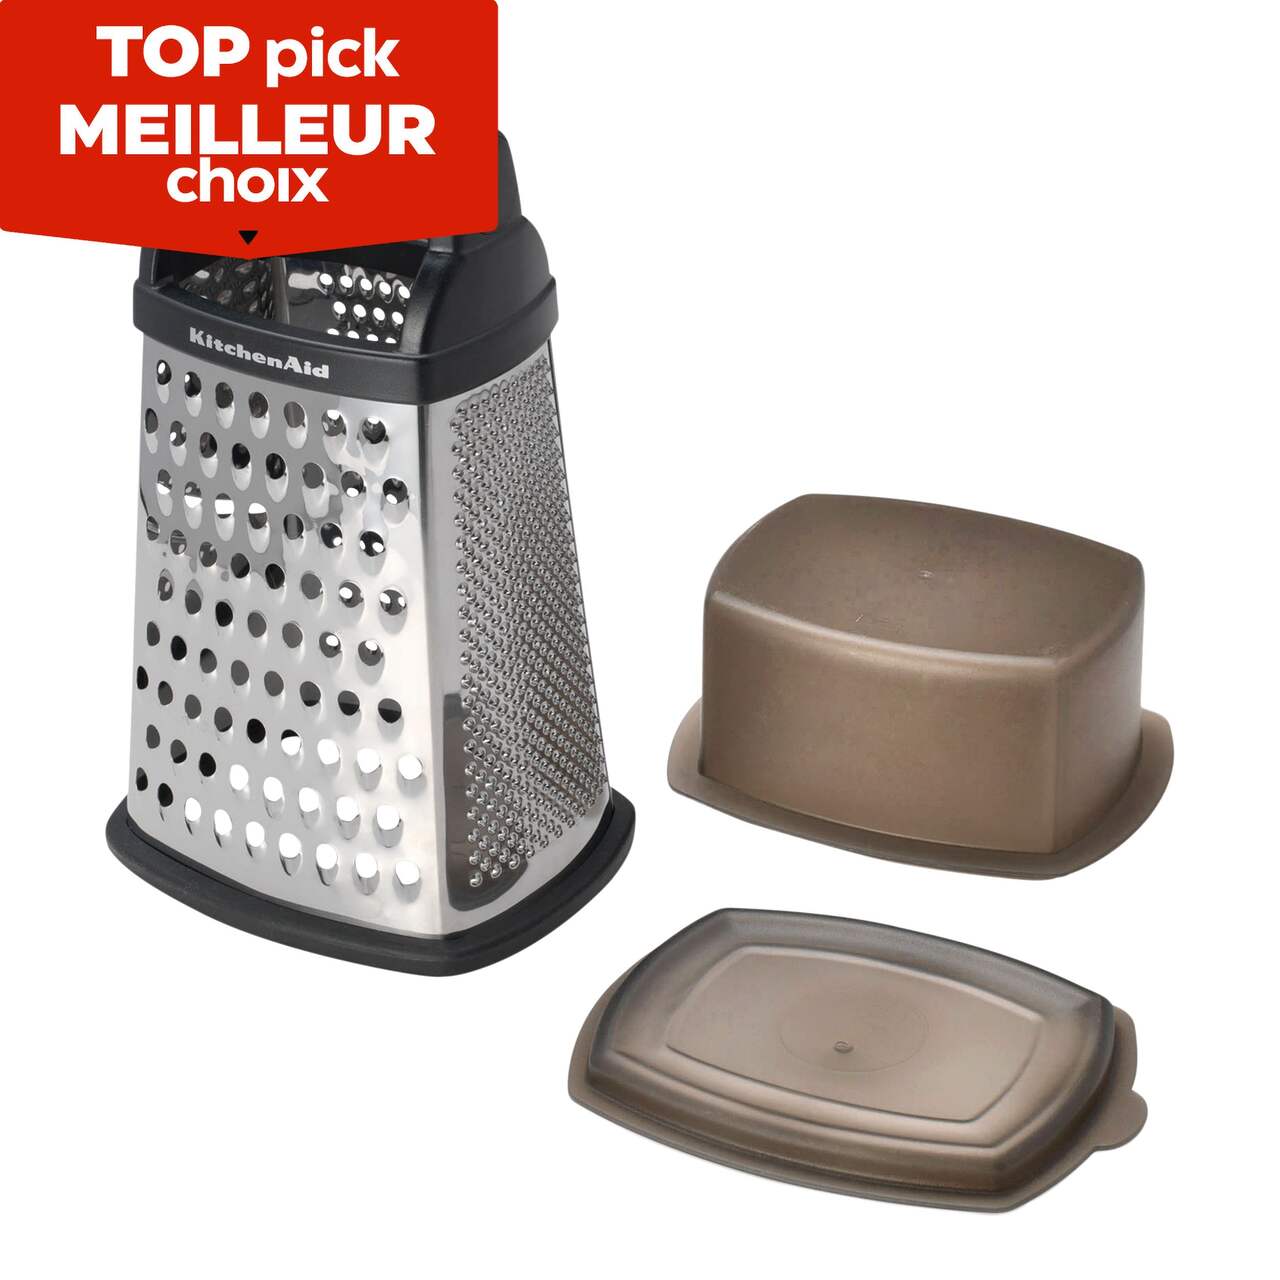 https://media-www.canadiantire.ca/product/living/kitchen/kitchen-tools-thermometers/0428549/kitchenaid-boxed-grater-da2f2a71-5100-4fa4-879f-dec49961a0c1-jpgrendition.jpg?imdensity=1&imwidth=640&impolicy=mZoom